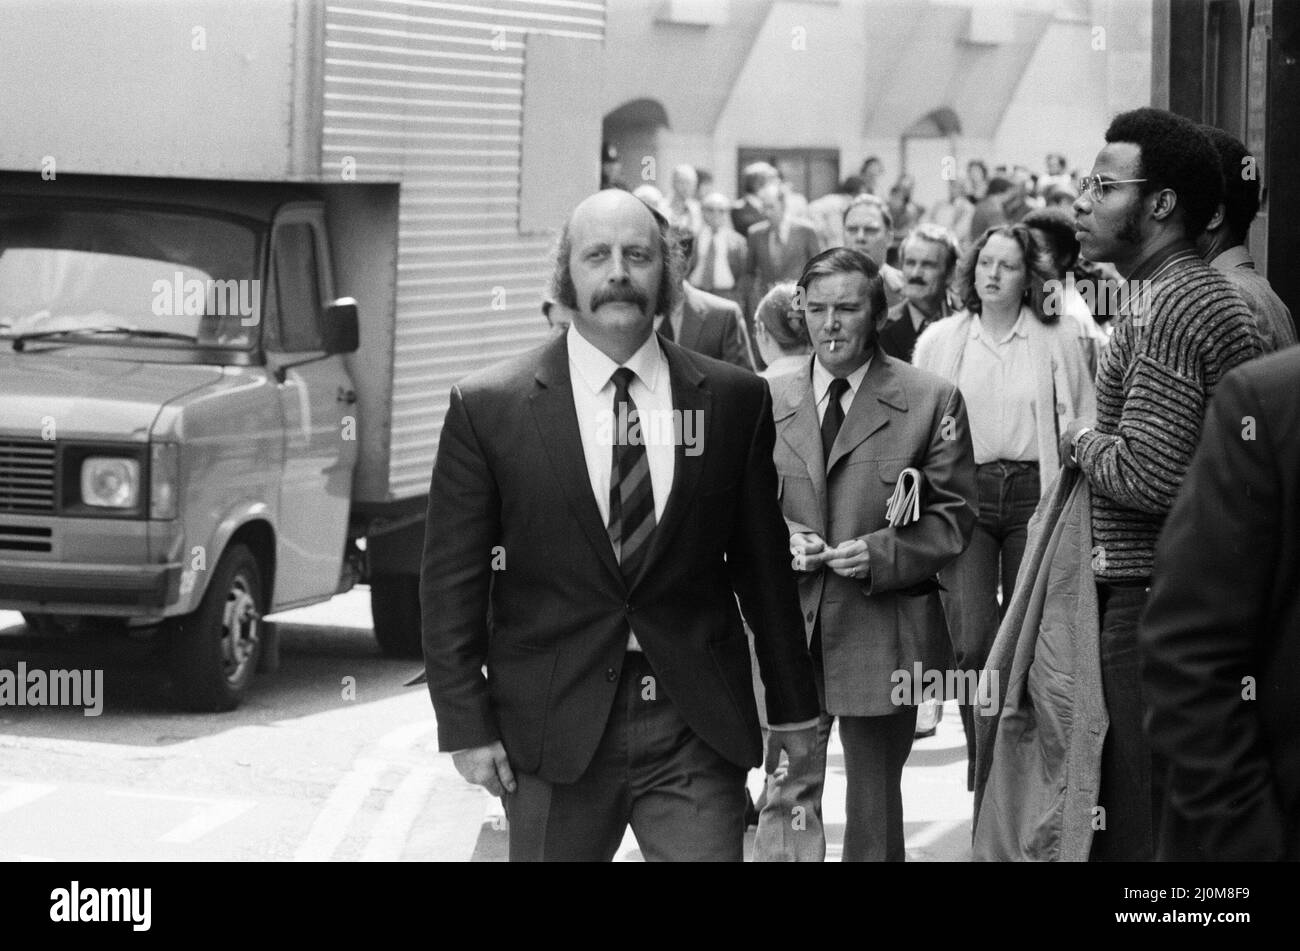 Scenes outside the Old Bailey during the trial of Peter Sutcliffe, the Yorkshire Ripper. Pictured, Prison Officer Anthony Fitzpatrick. 8th May 1981. Stock Photo